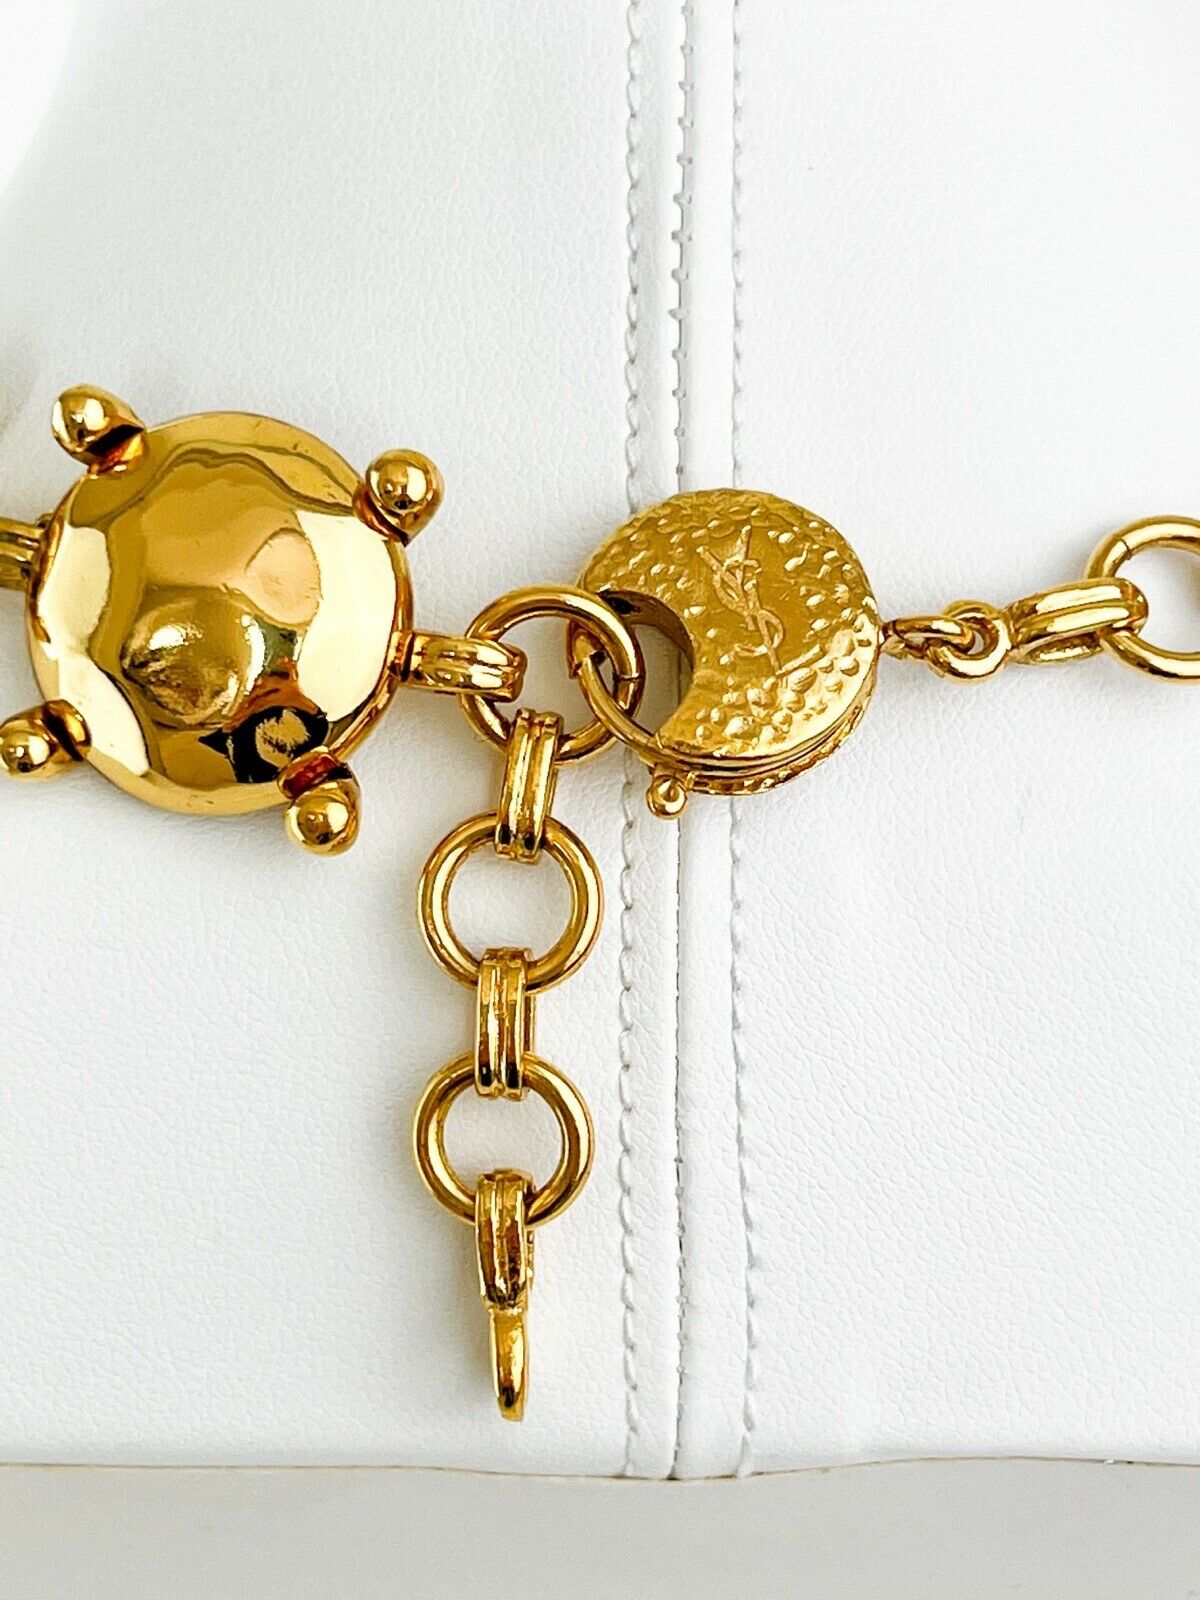 YSL Yves Saint Laurent Vintage Necklace Gold Tone Round Charm Made in France